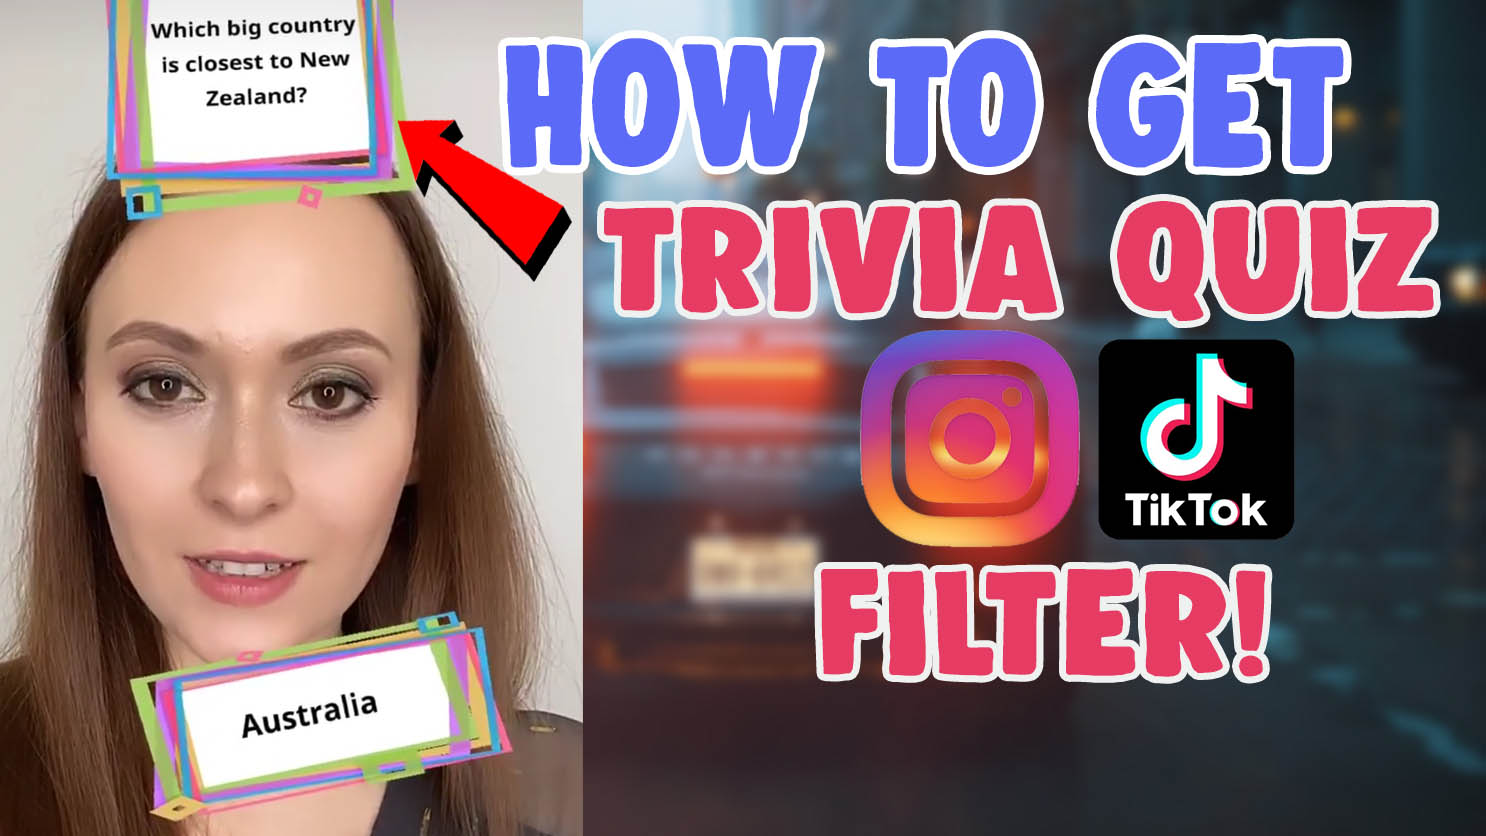 Tiktok Trivia Questions And Answers Do you know the secrets of sewing?